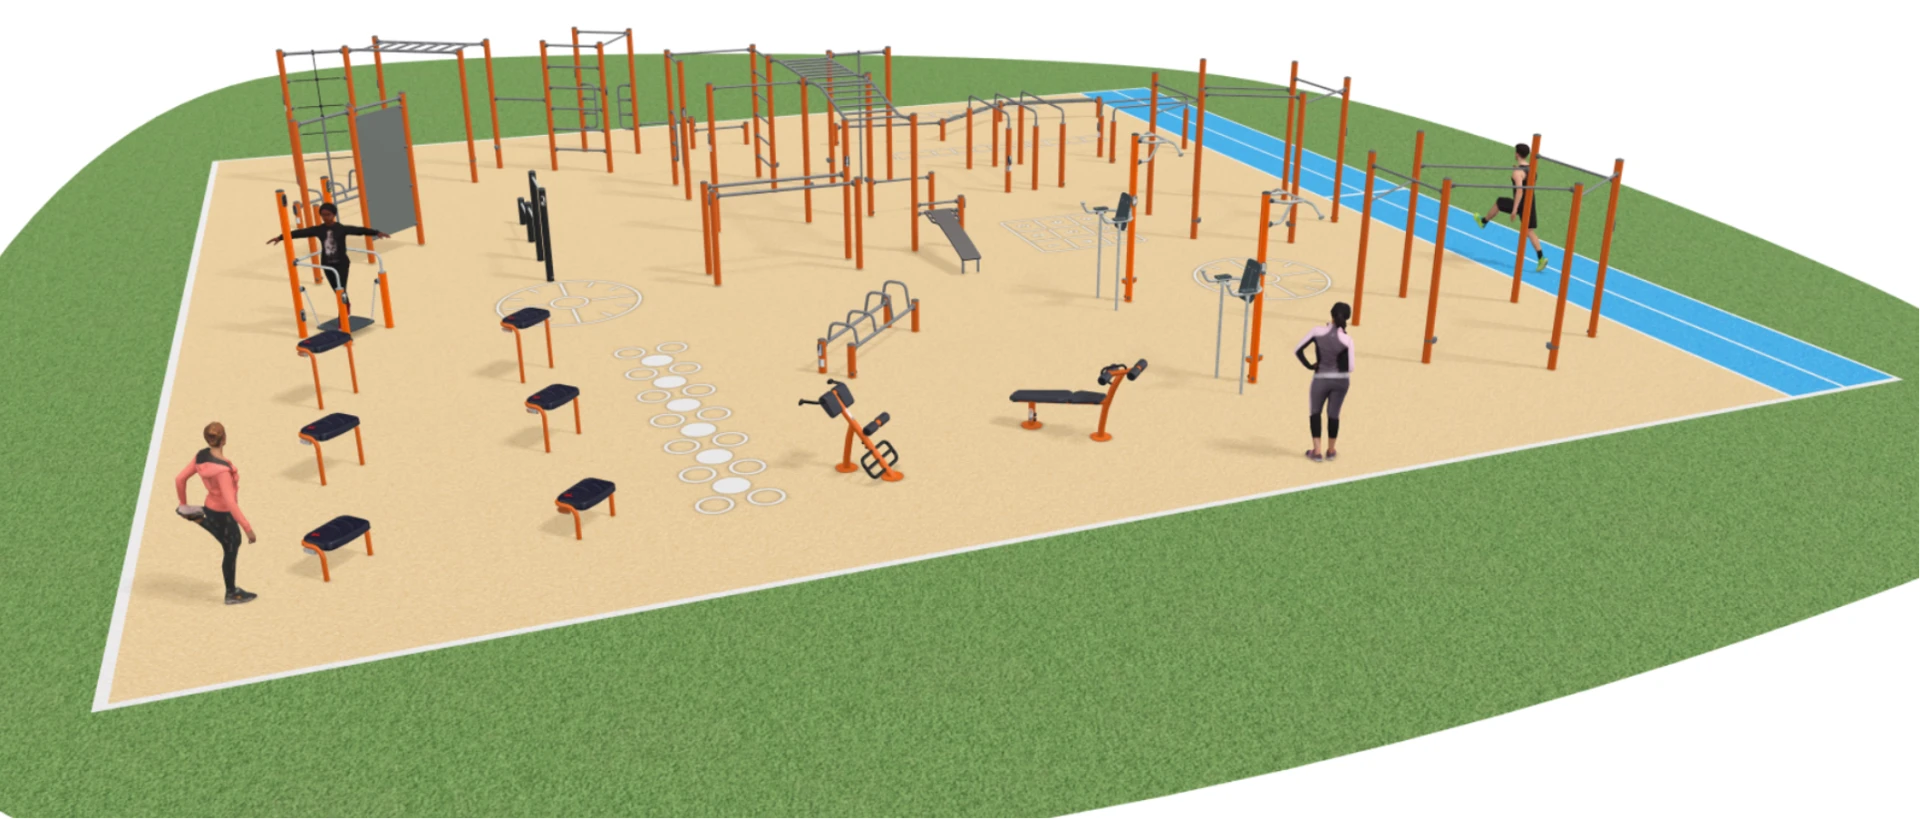 A 3d image of a cross - training area